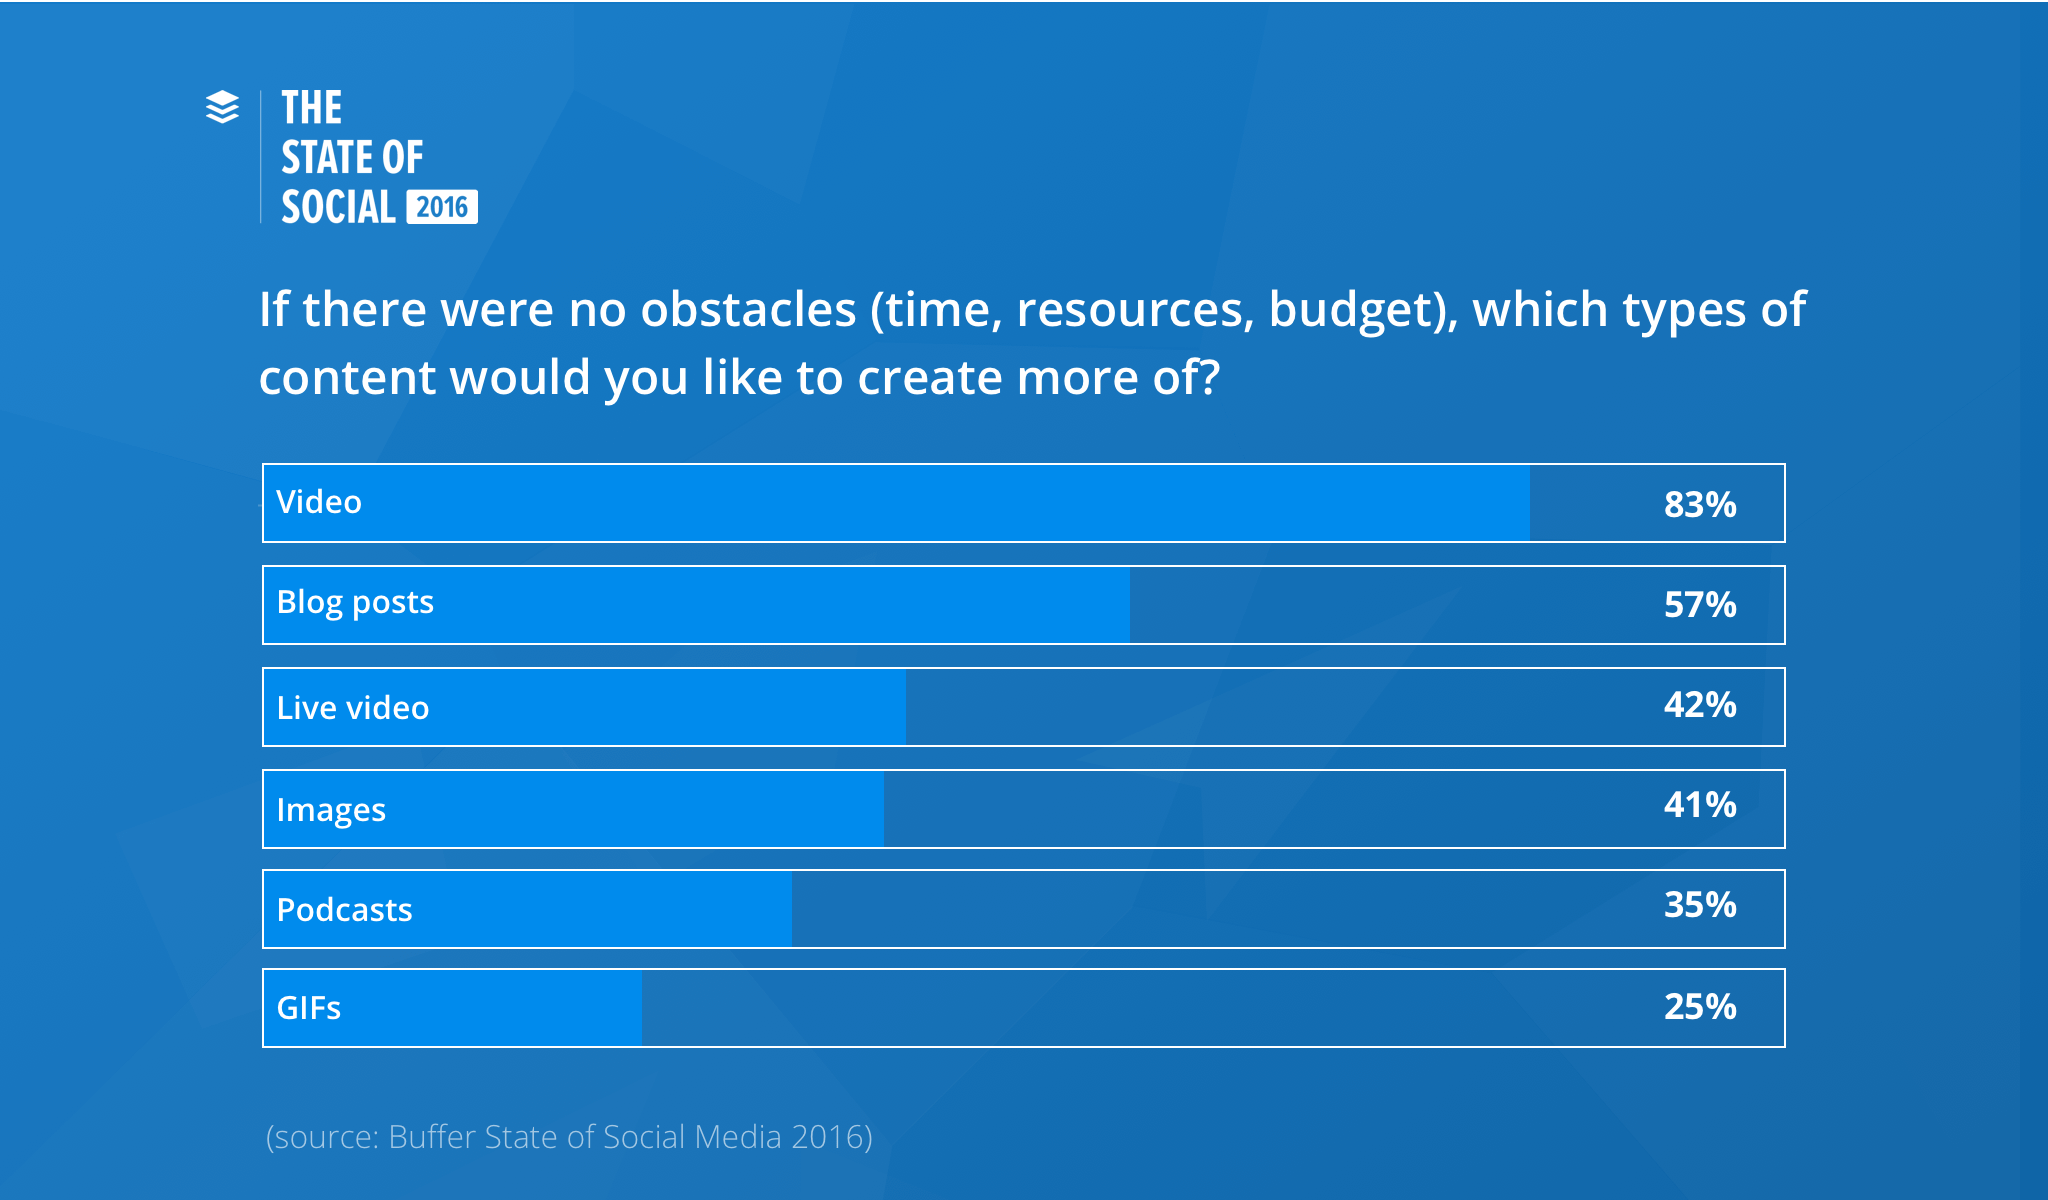 83%25 of marketers said they’d create more video content if there were no obstacles like time, resources, and budget (Buffer, 2016). 43%25 of marketers said they’d create more live videos if there were no obstacles like time, resources, and budget (Buffer, 2016).